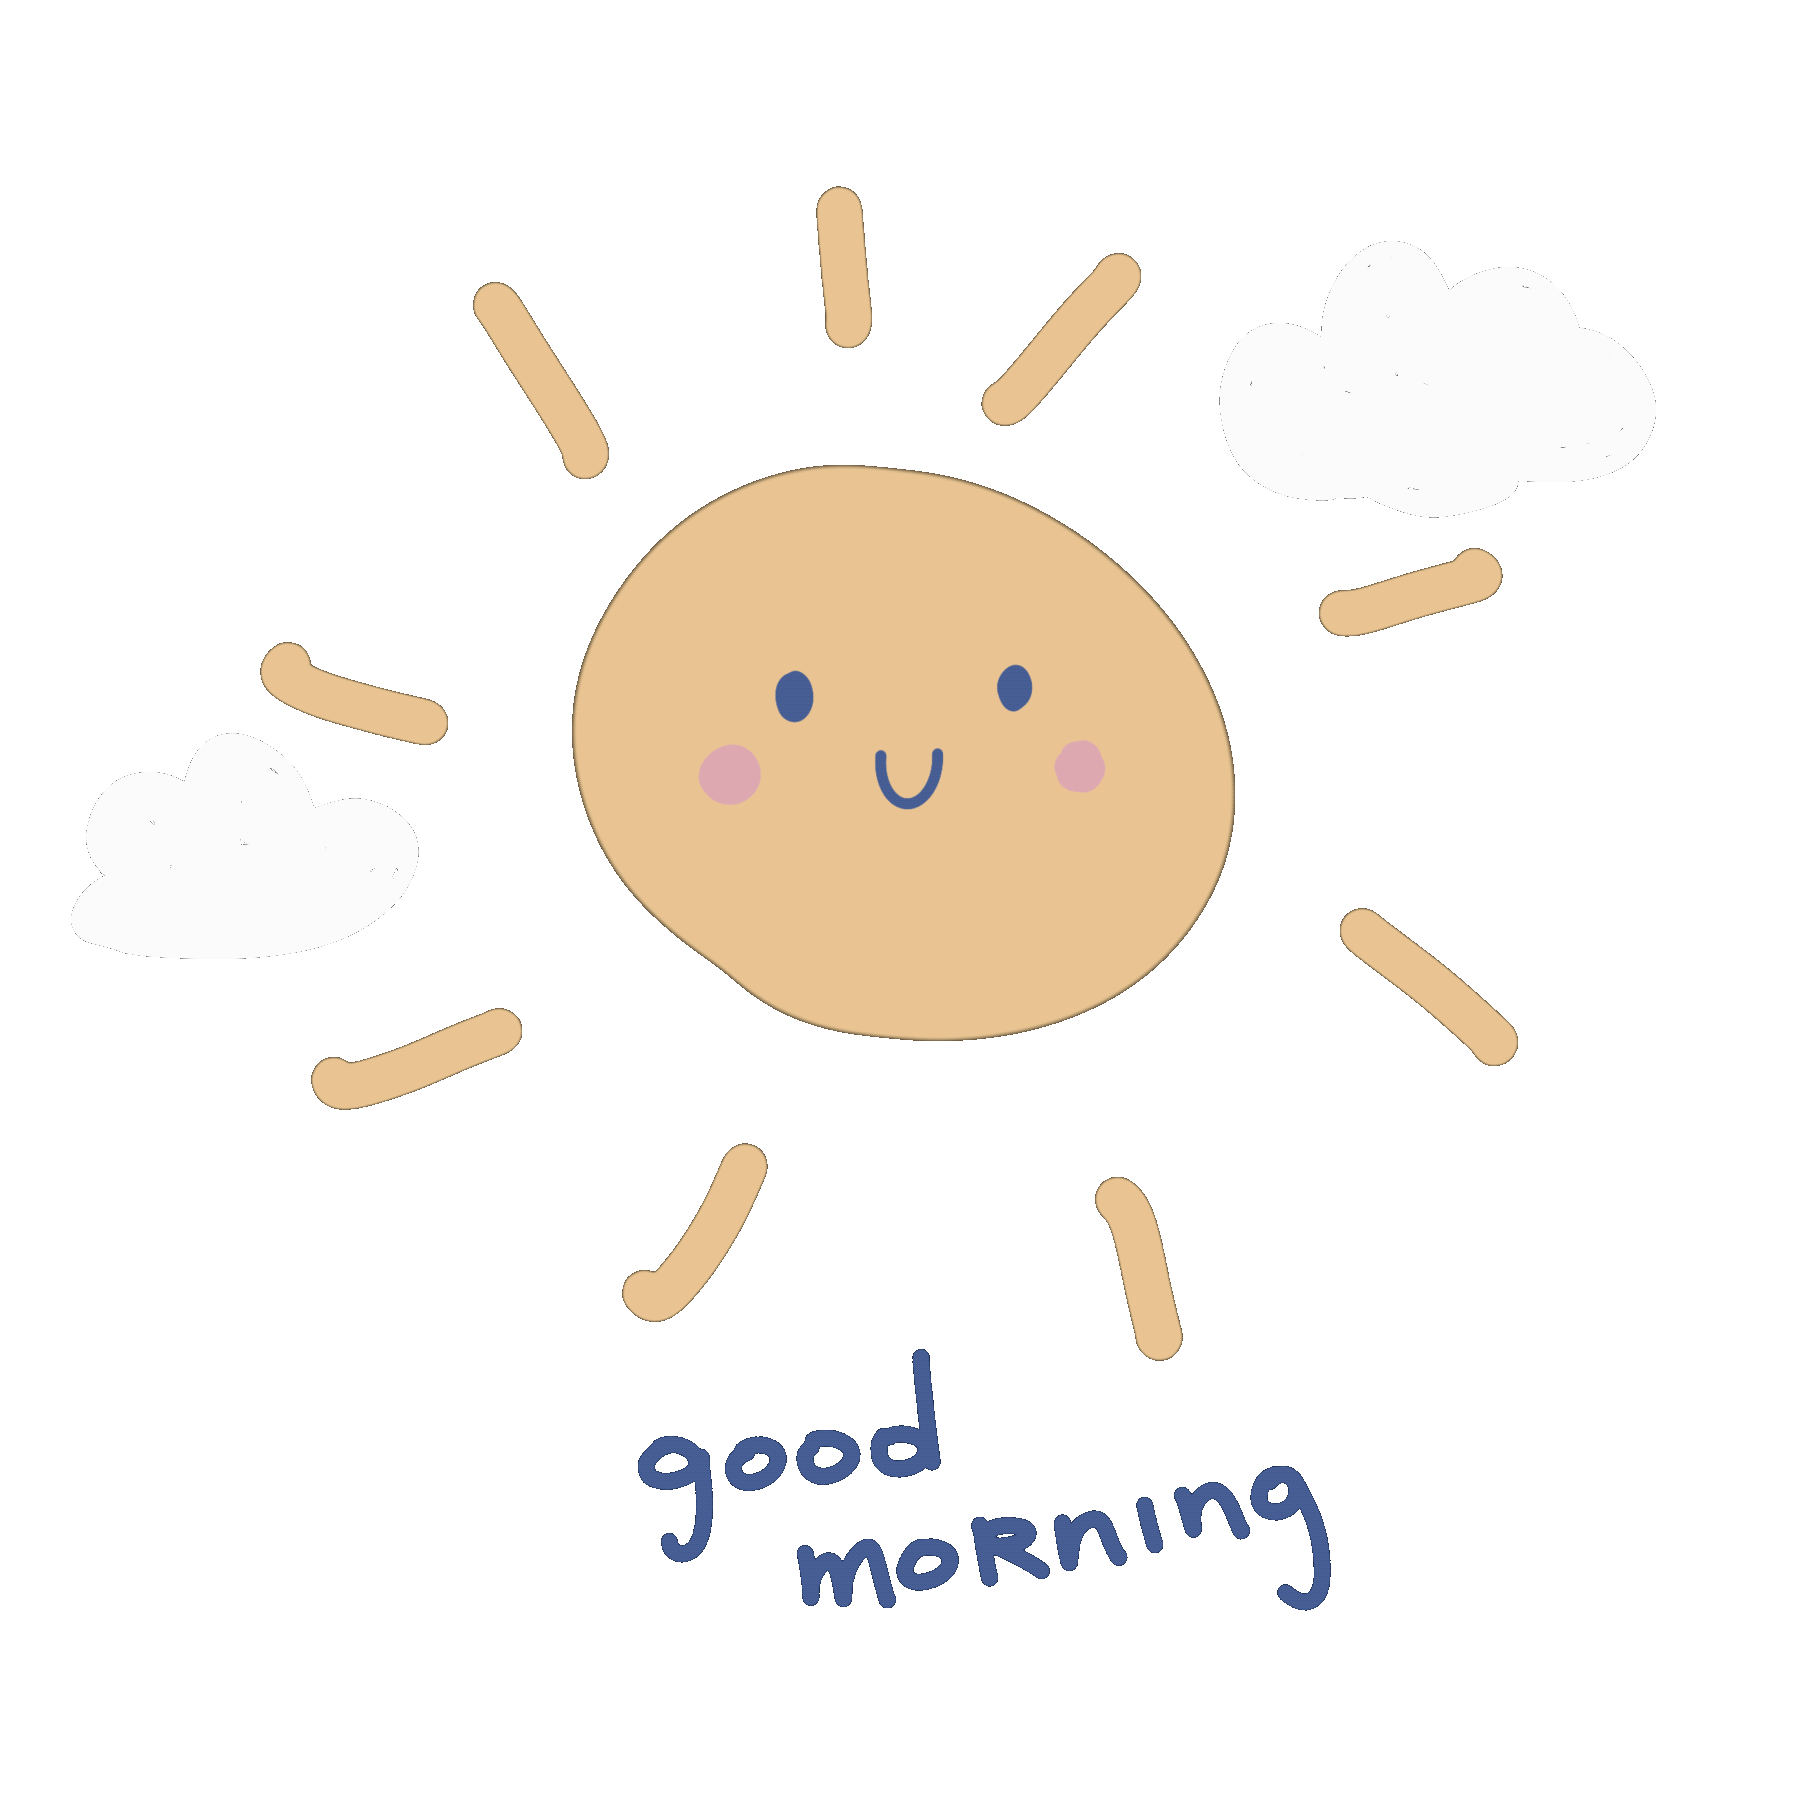 Good Morning Sun Sticker by adharart for iOS & Android | GIPHY